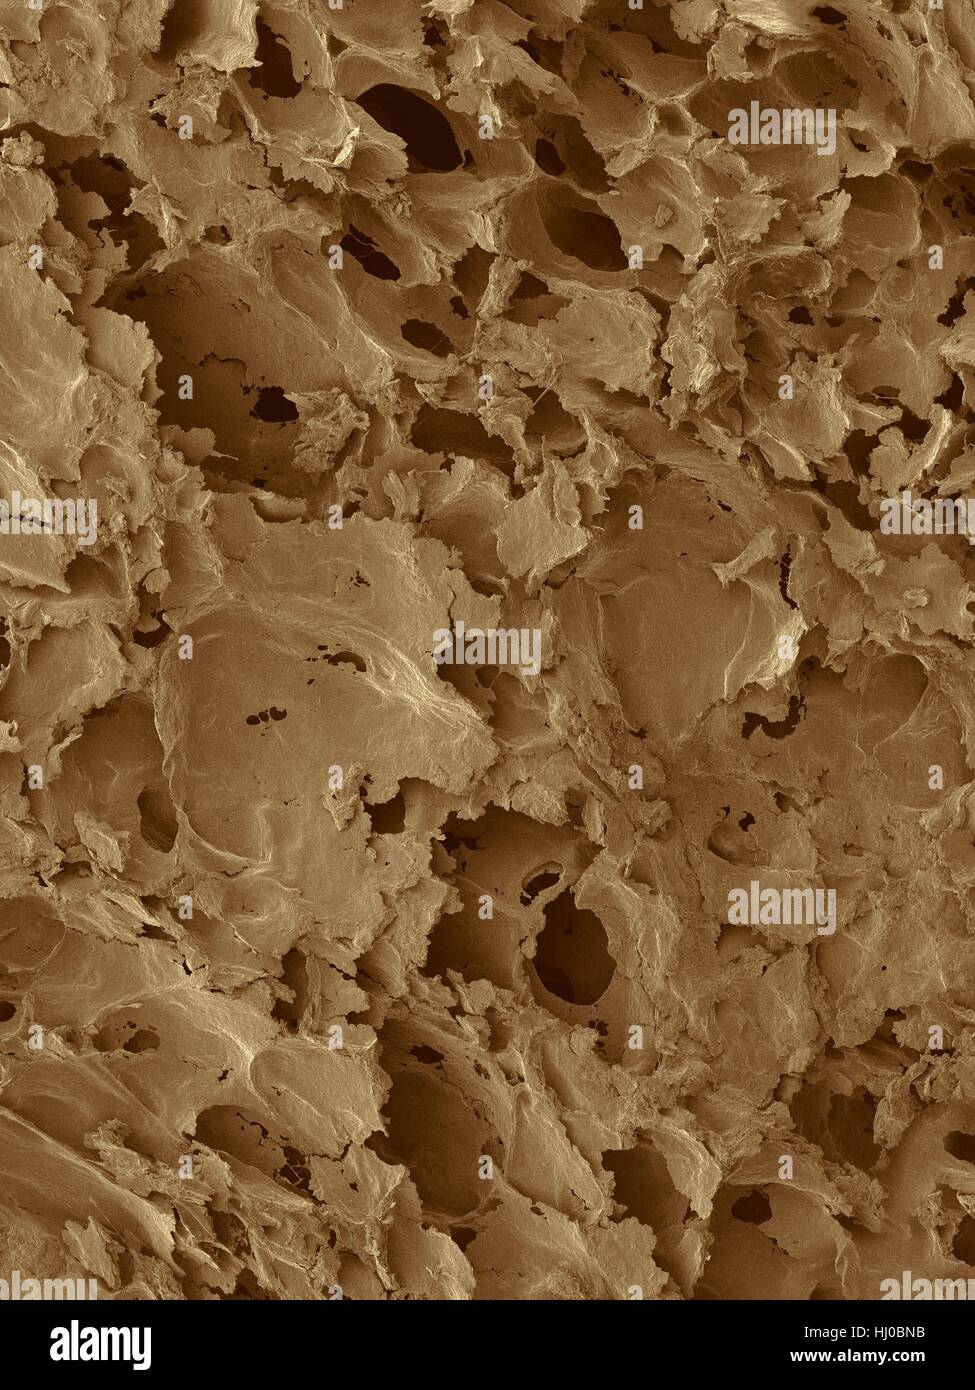 Coloured scanning electron micrograph (SEM) of White bread surface.Shown here is slice of white sandwich bread,revealing large airspaces that develop as result of action of yeast.White bread made from wheat flour that has bran germ removed through process known as milling.Milling gives white flour Stock Photo